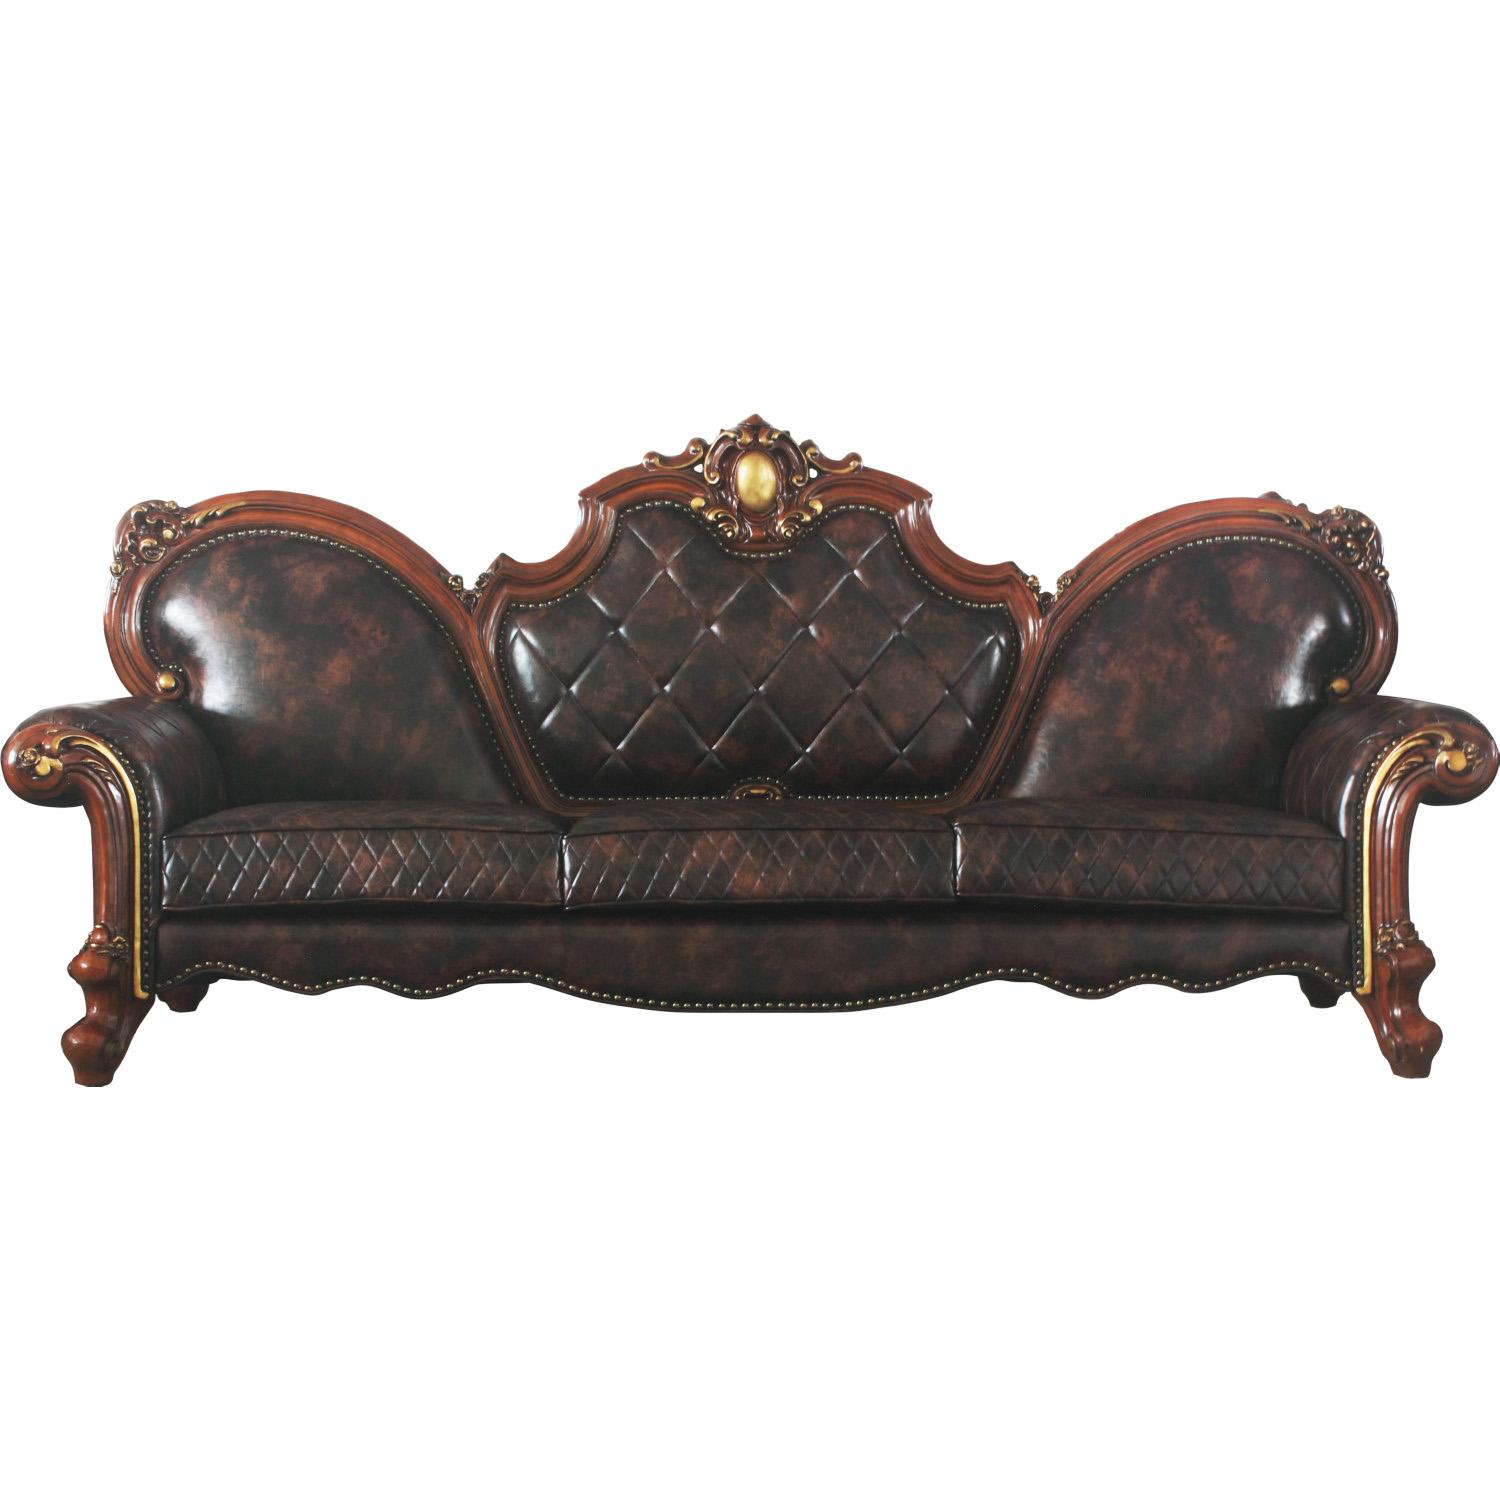 Classic, Traditional Sofa Picardy 58220 58220-Picardy in Oak, Cherry PU